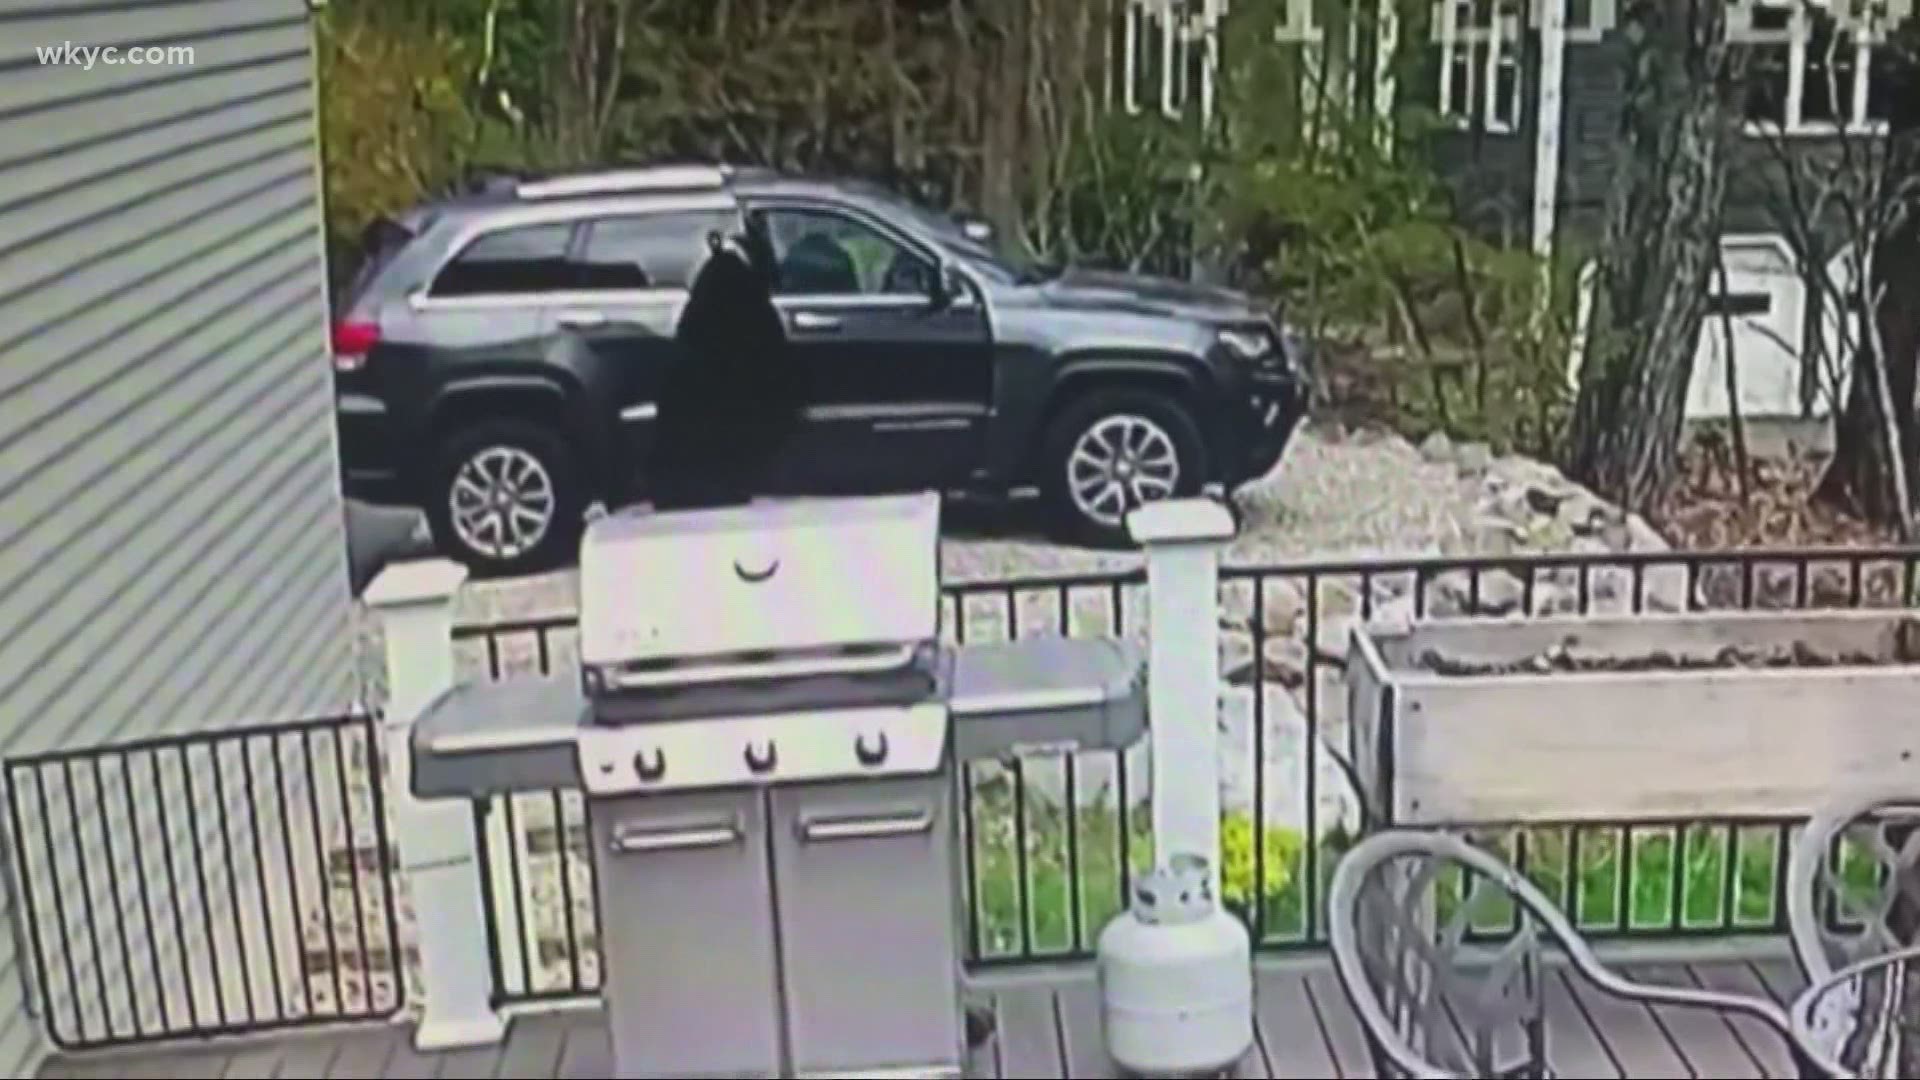 These three bears opened and got inside this parked SUV. The home owner caught the act on surveillance video.